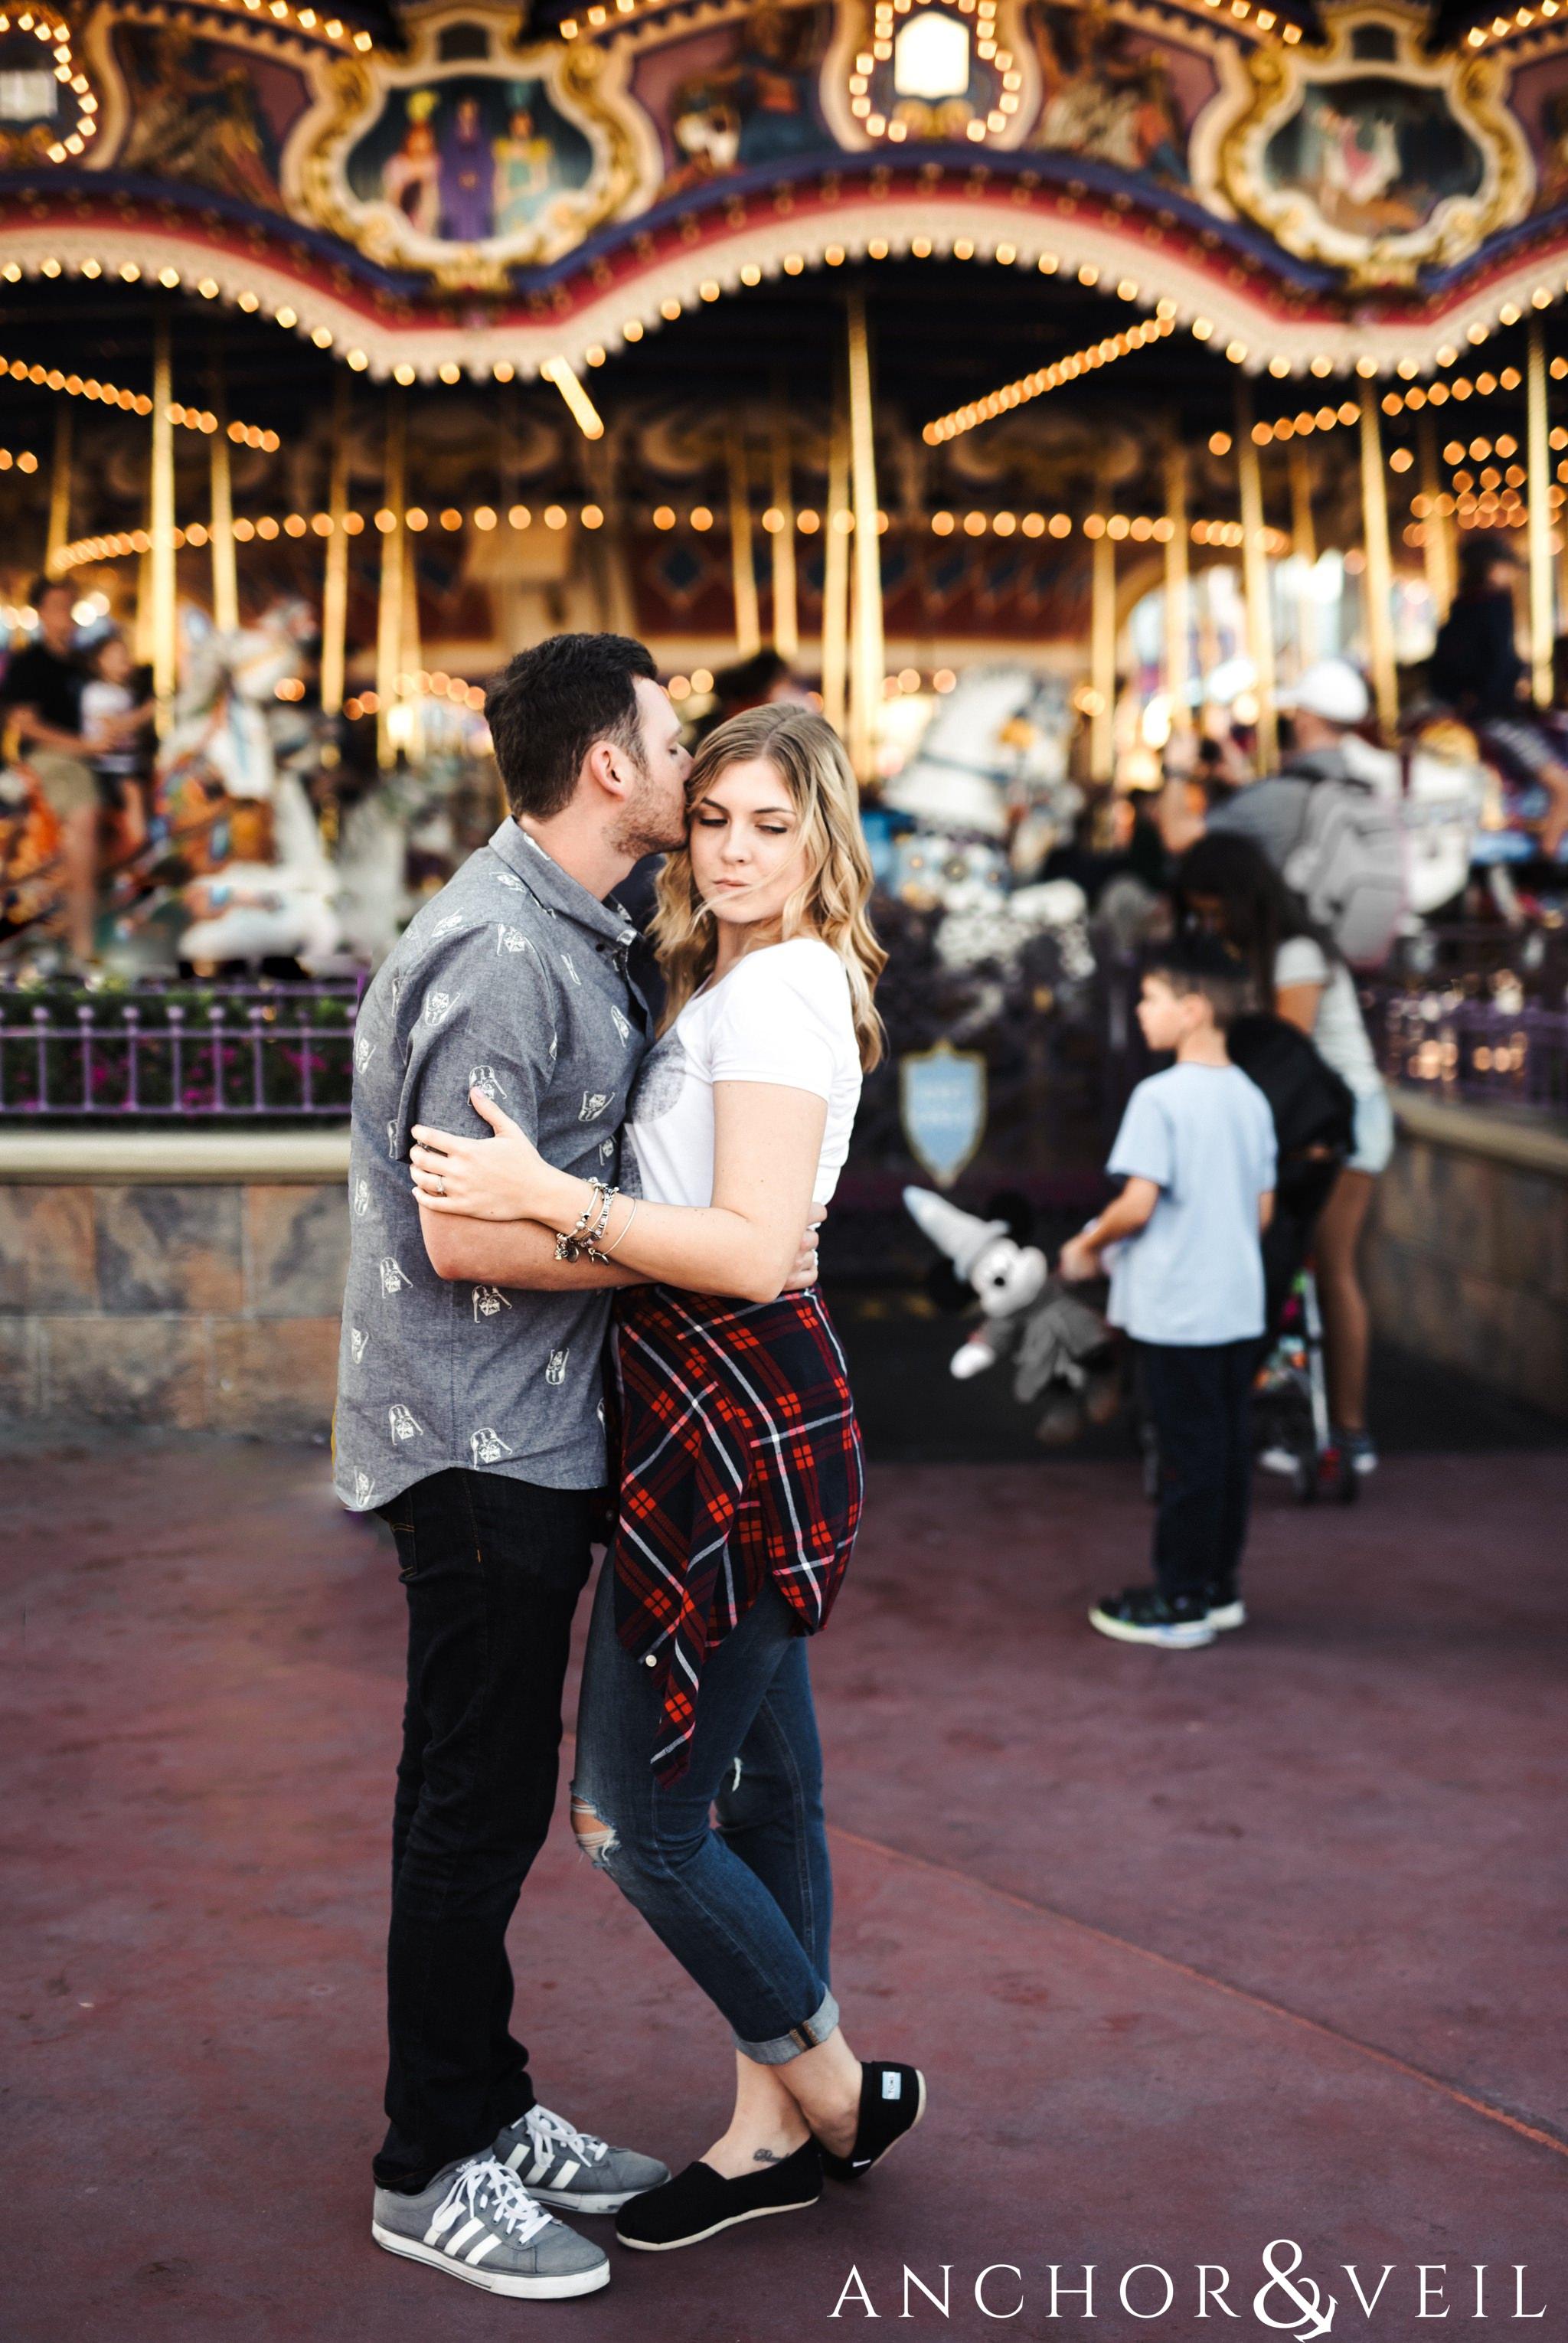 in front of the carousel during their Disney world engagement session at Disney's Magic Kingdom